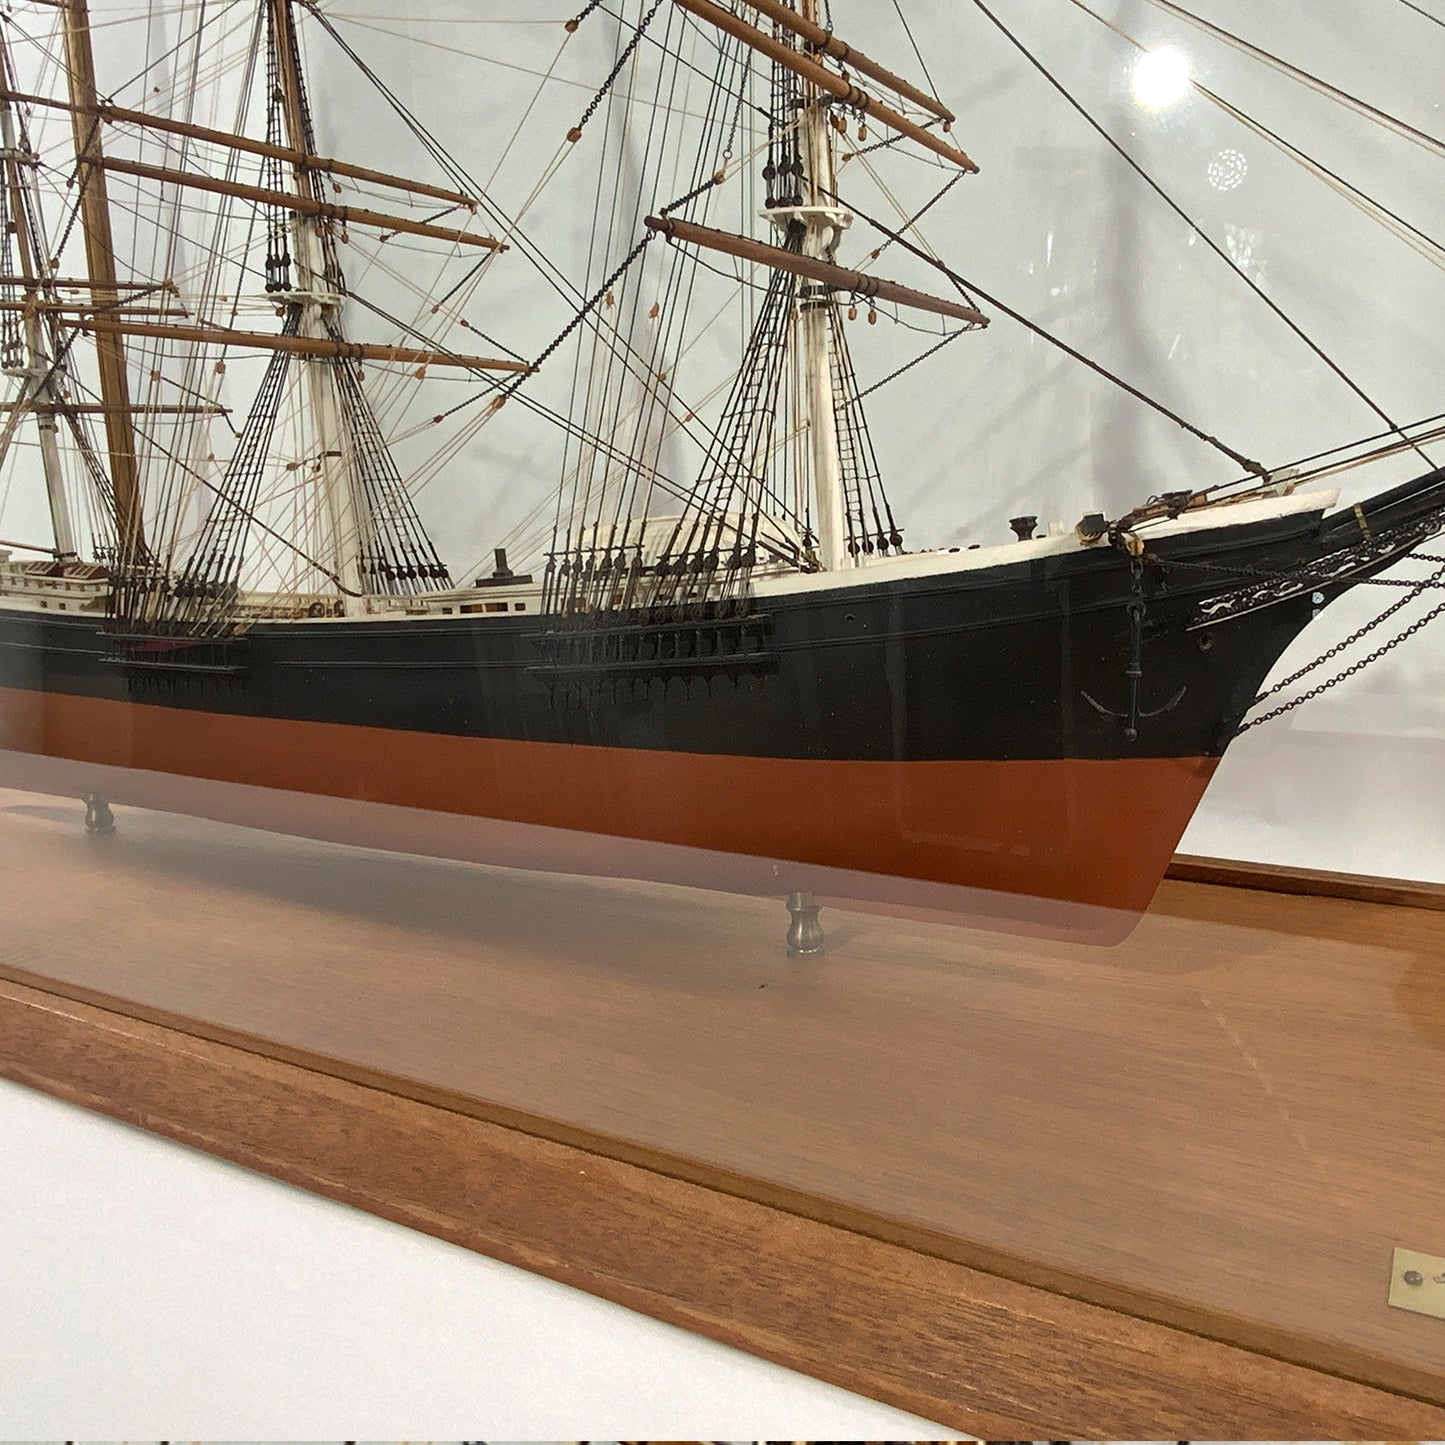 Wood Cased Ship Model Of The Bent F. Packard of Seattle - Lannan Gallery